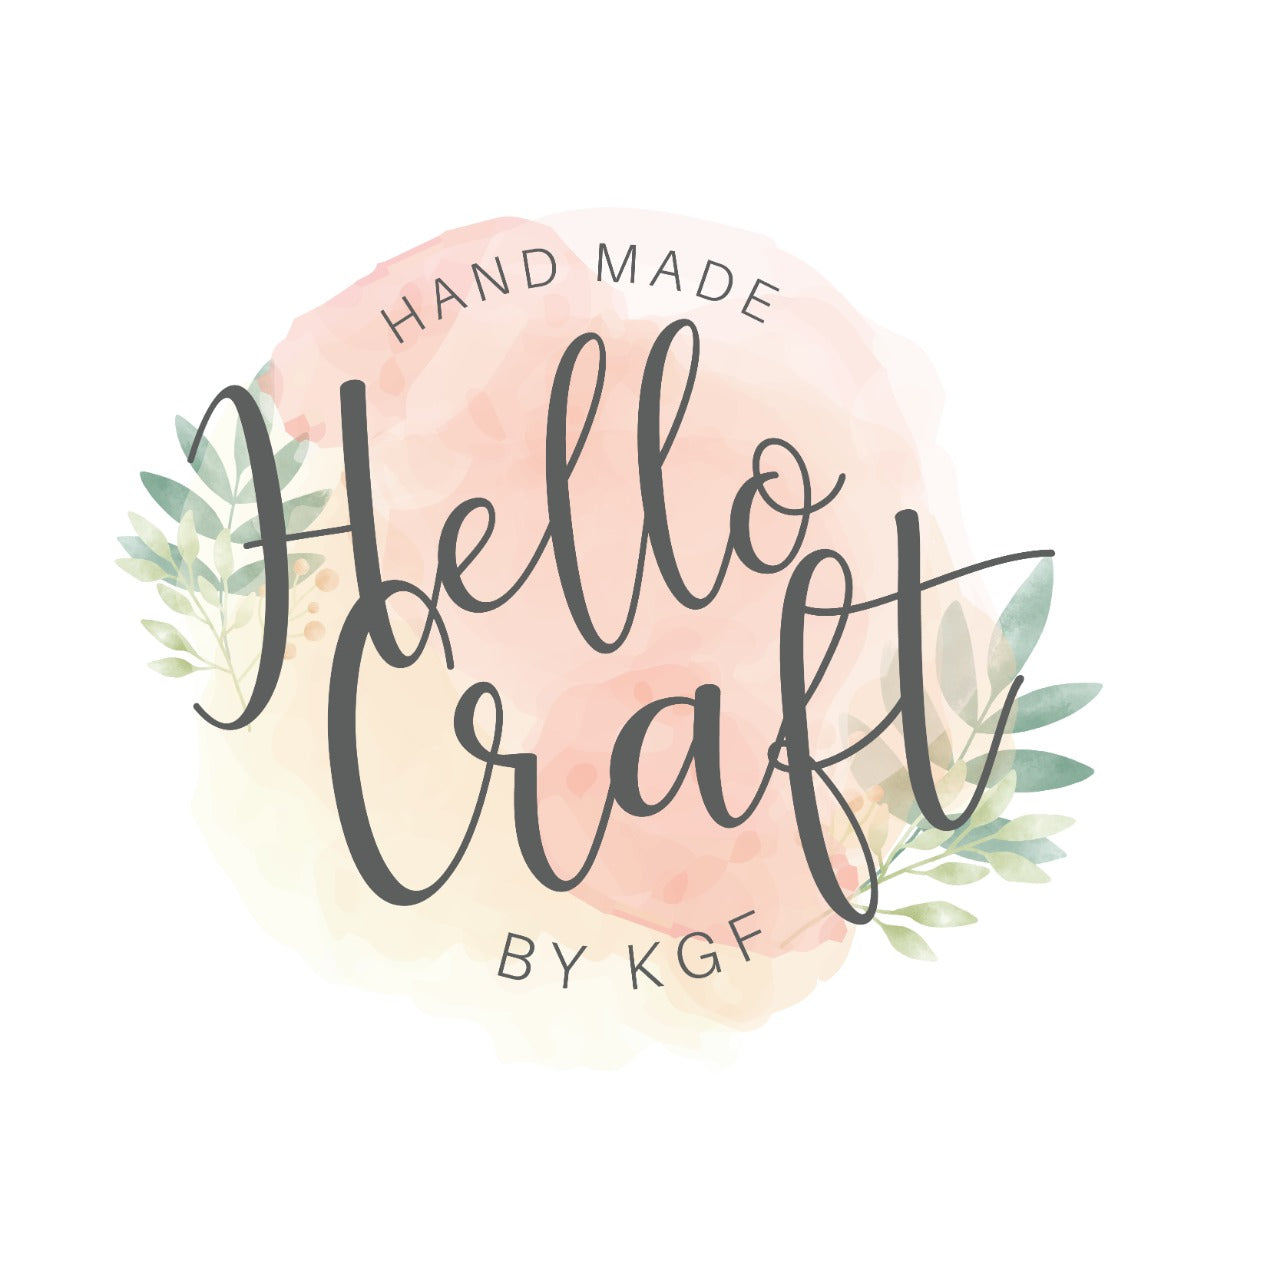 Welcome to Hello Craft by KGF